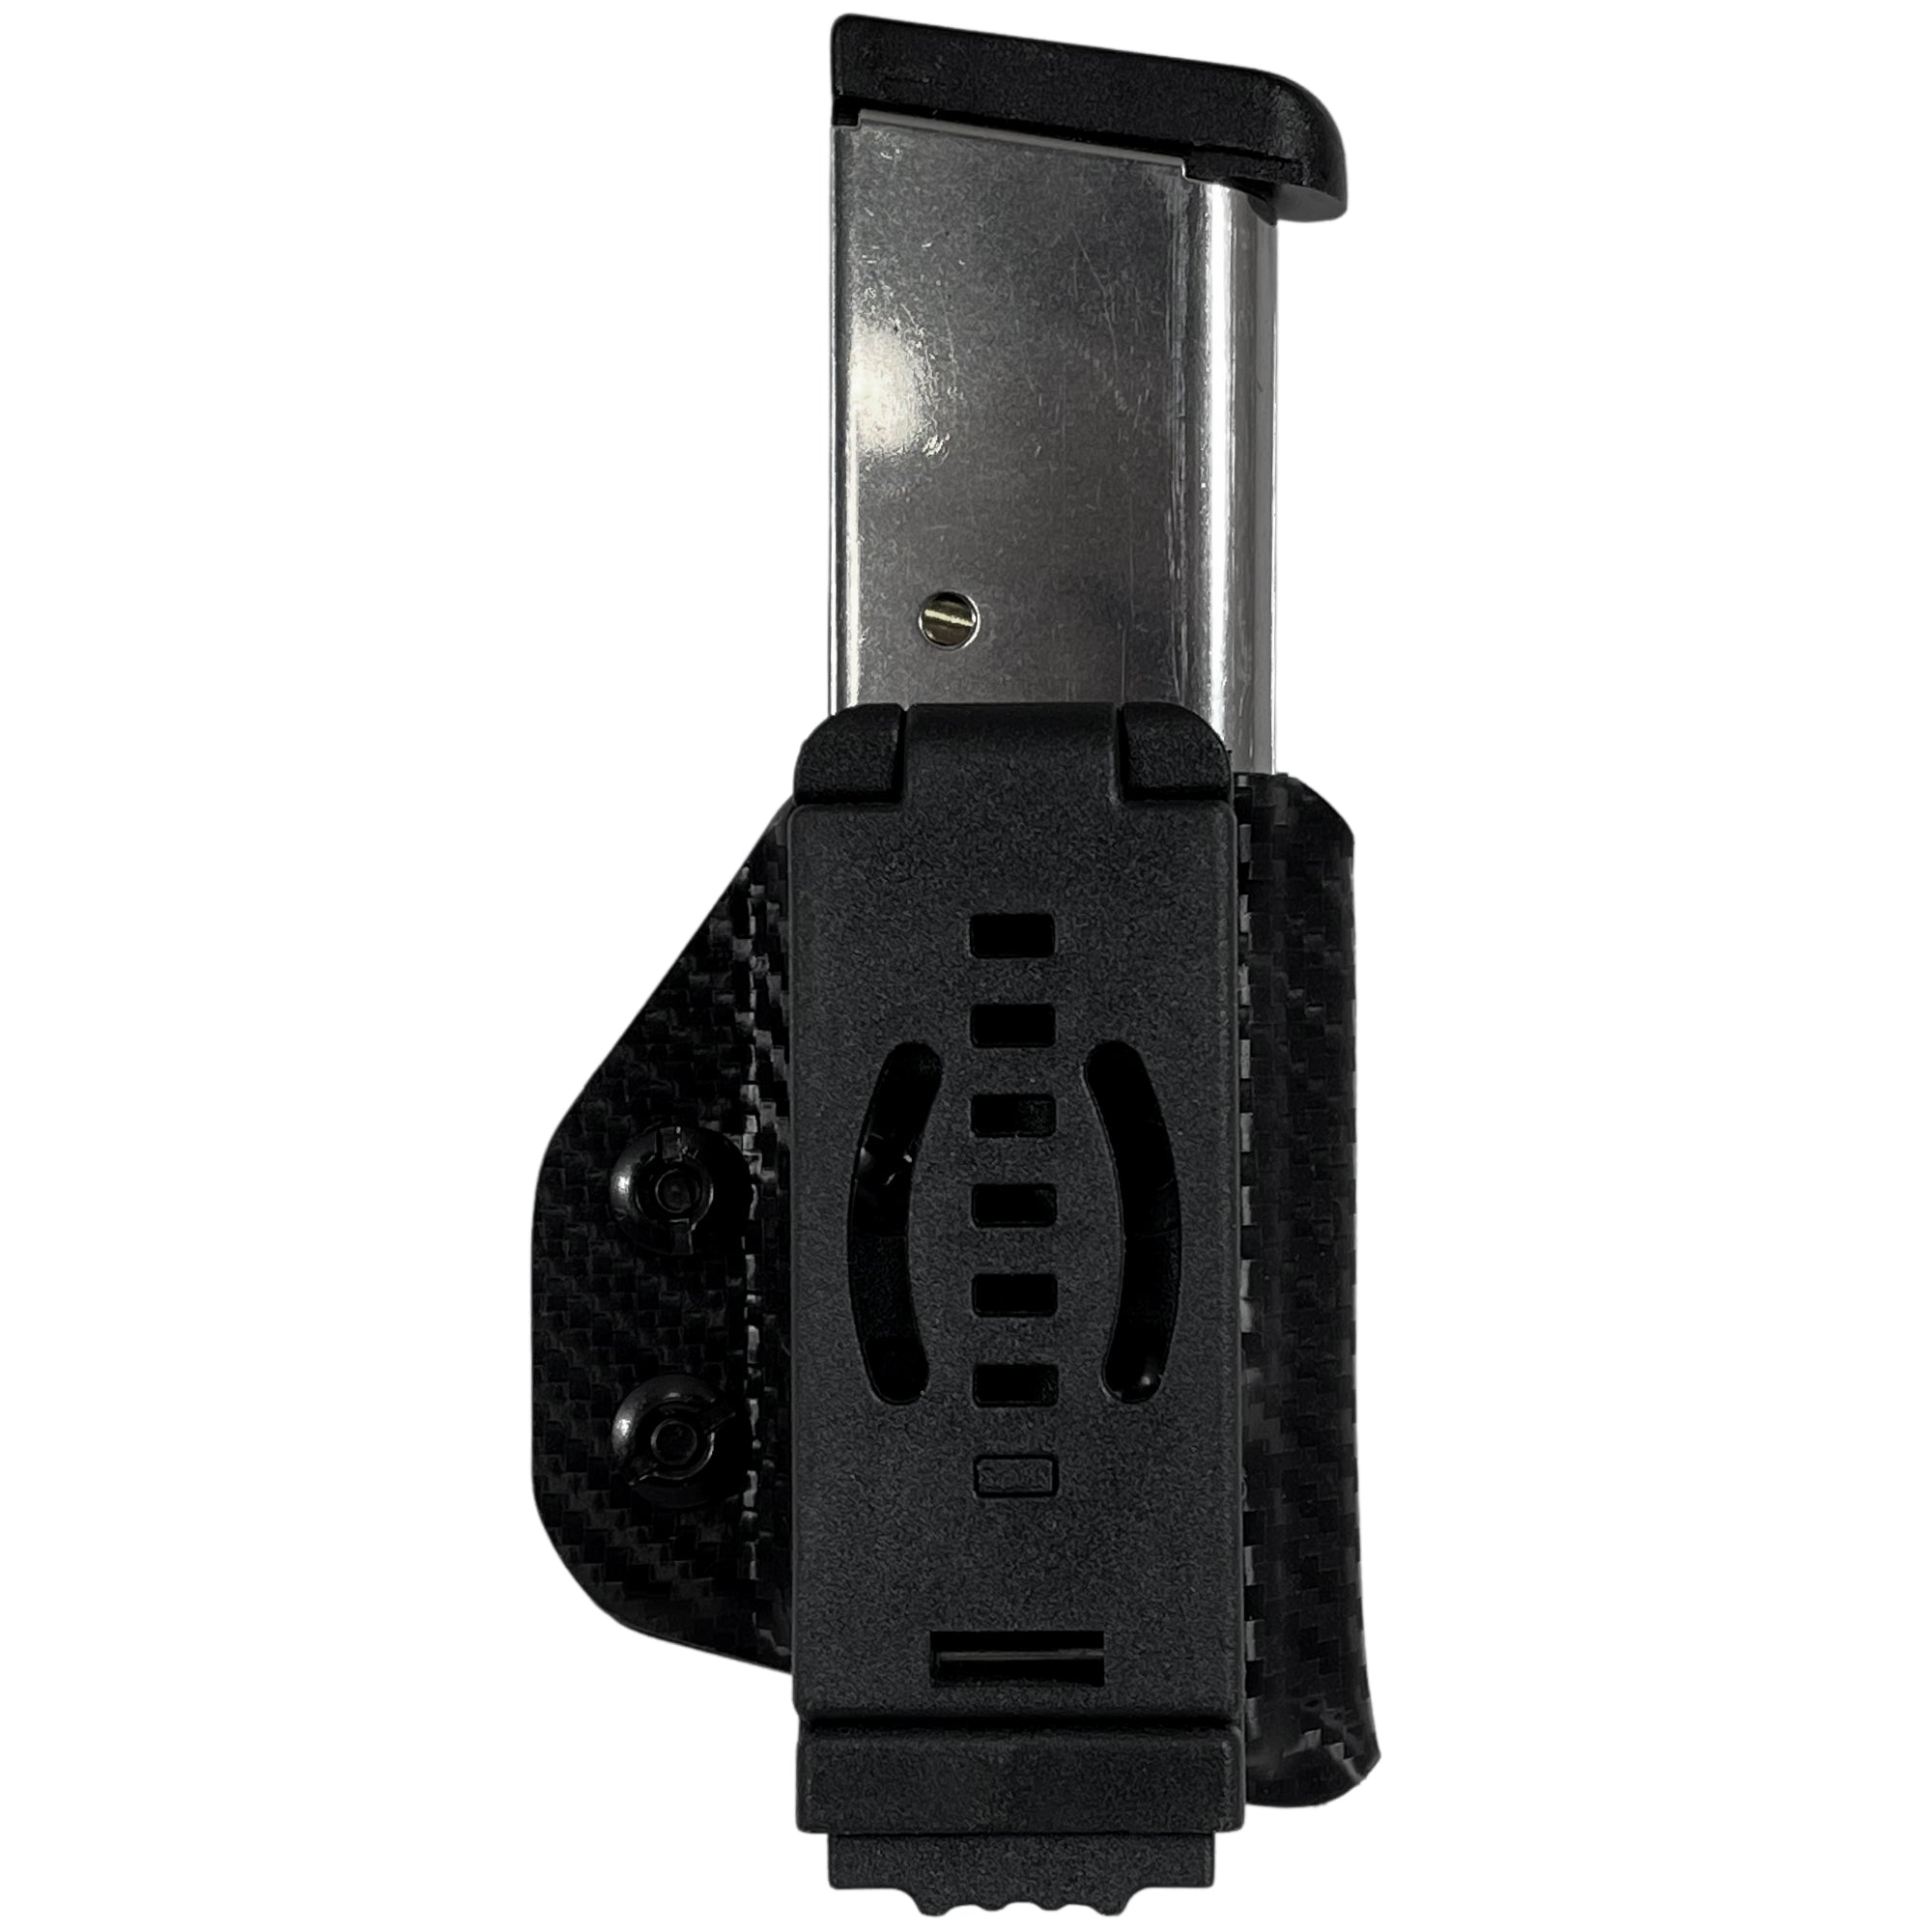 1911 OWB Single Stack Magazine Carrier .45 ACP